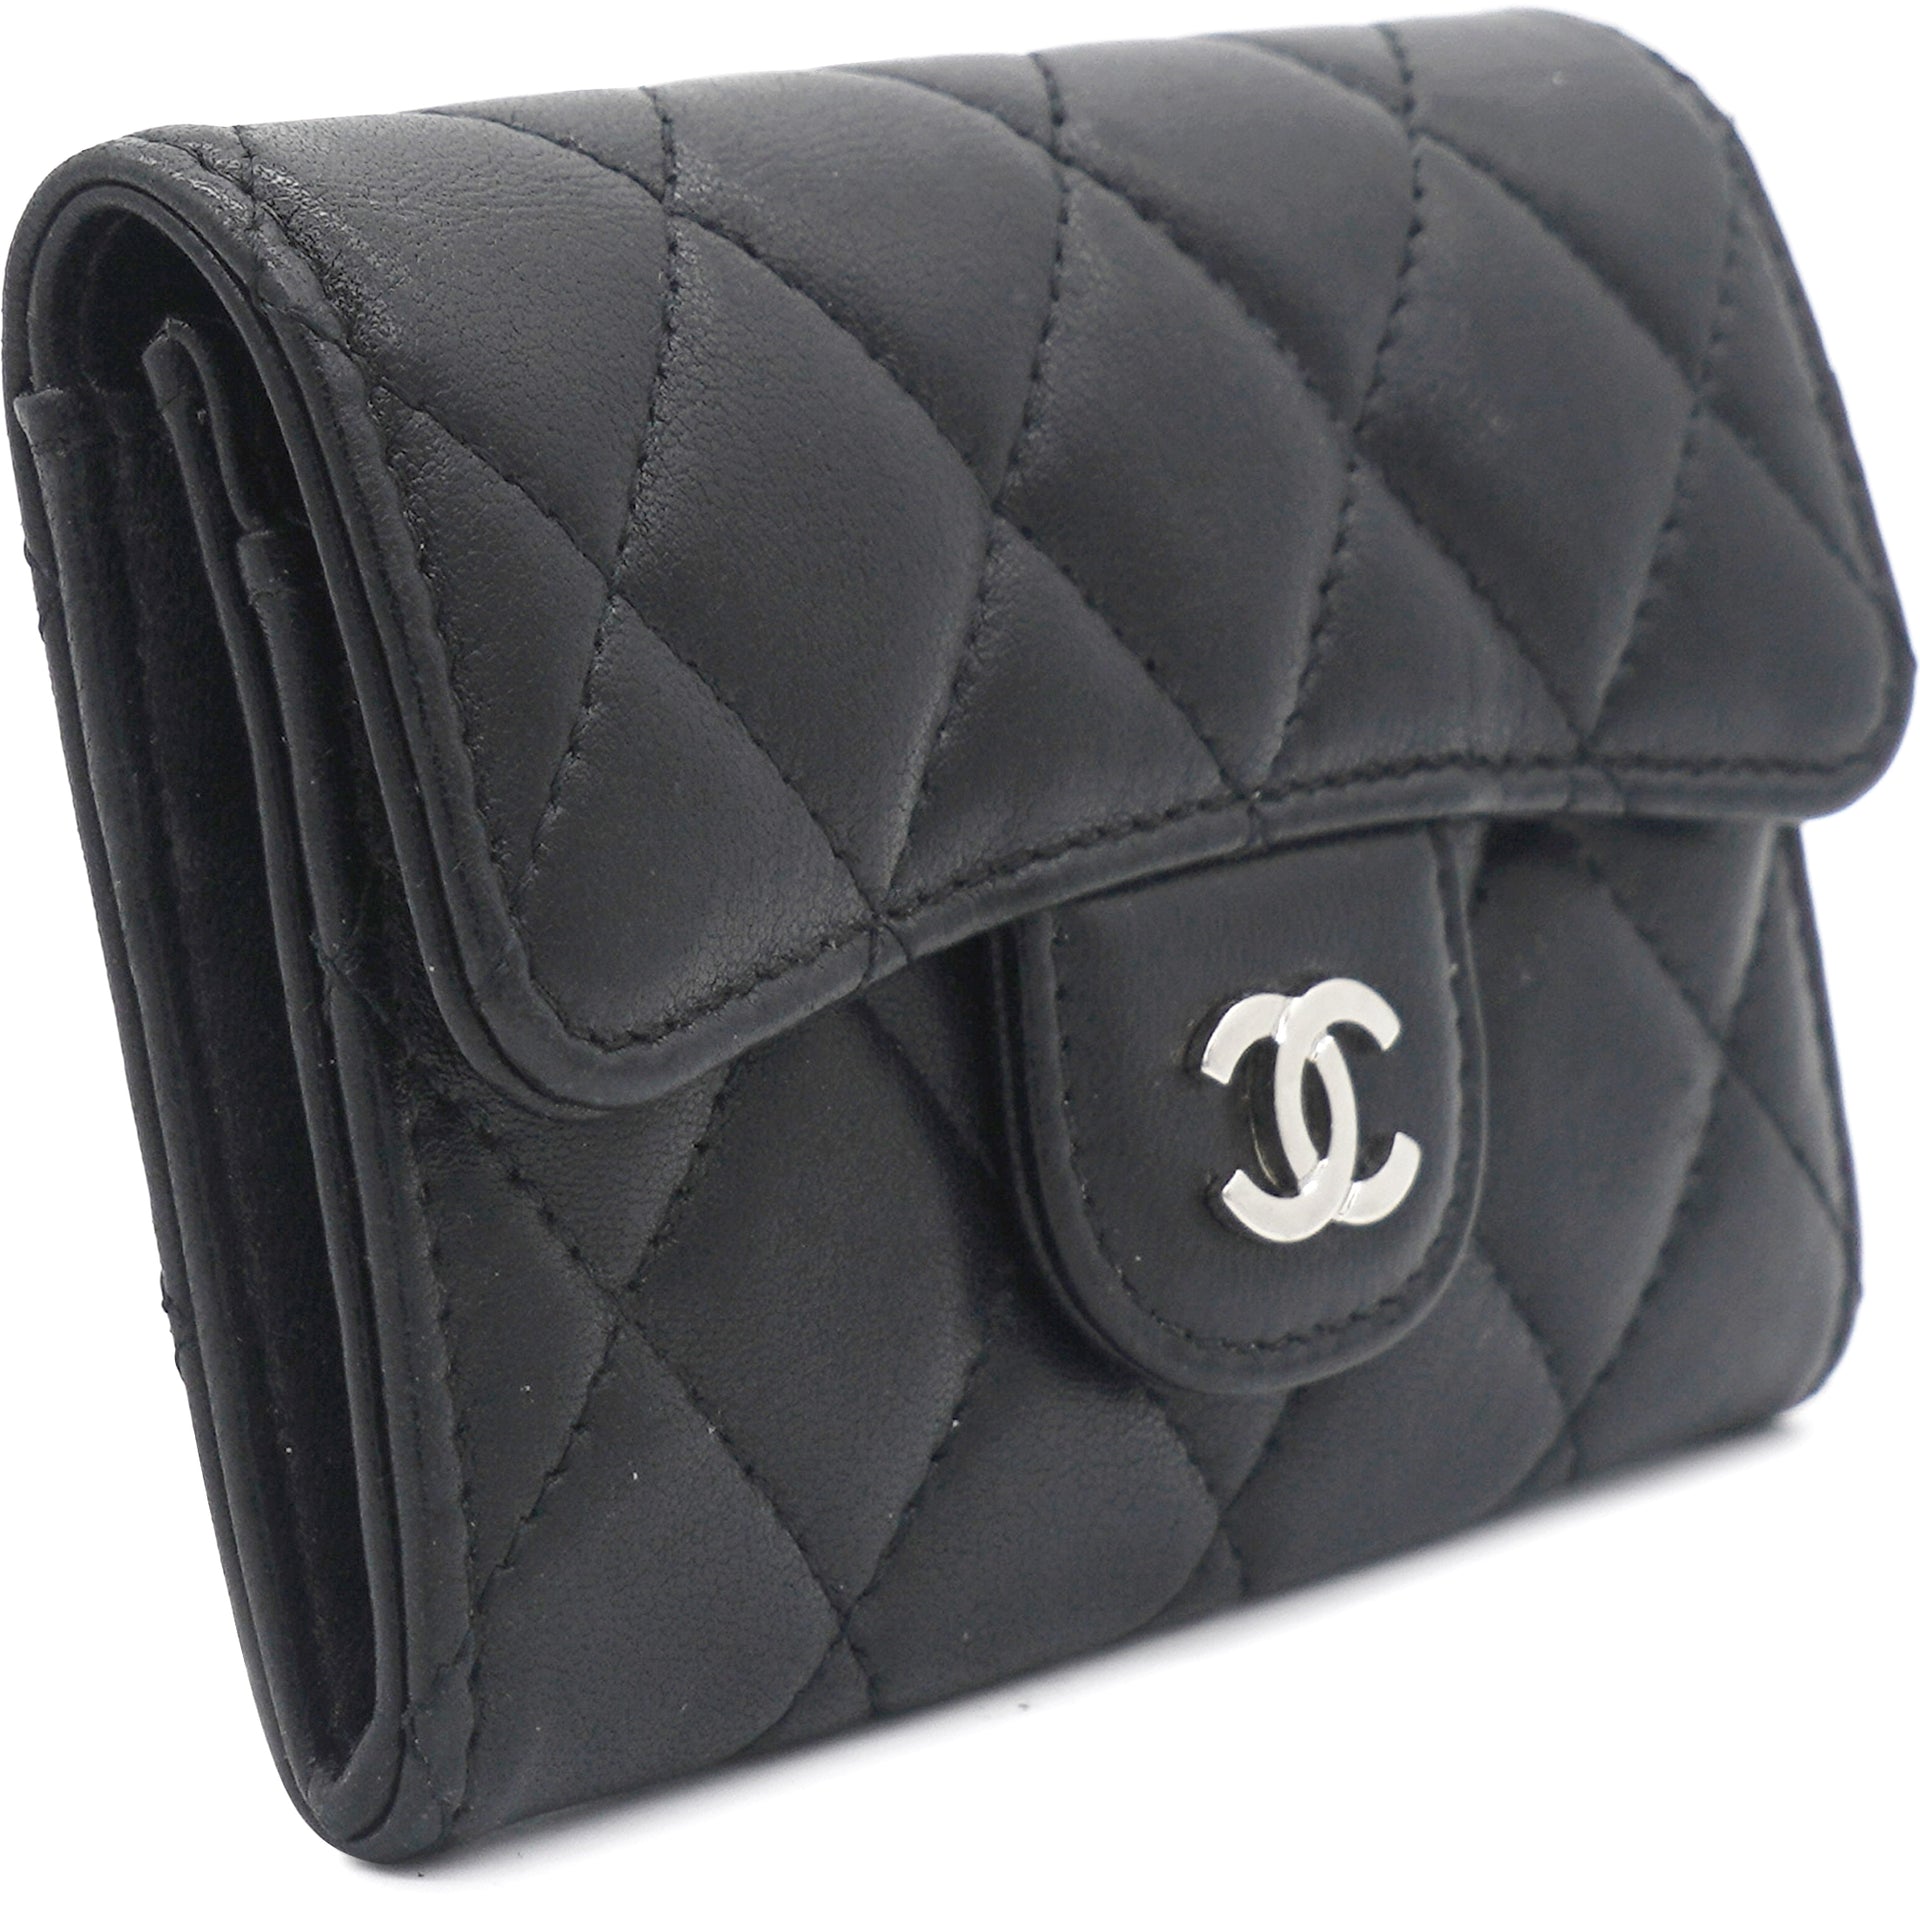 Authentic Second Hand Chanel Caviar Classic Long Flap Wallet  PSS29200022  THE FIFTH COLLECTION